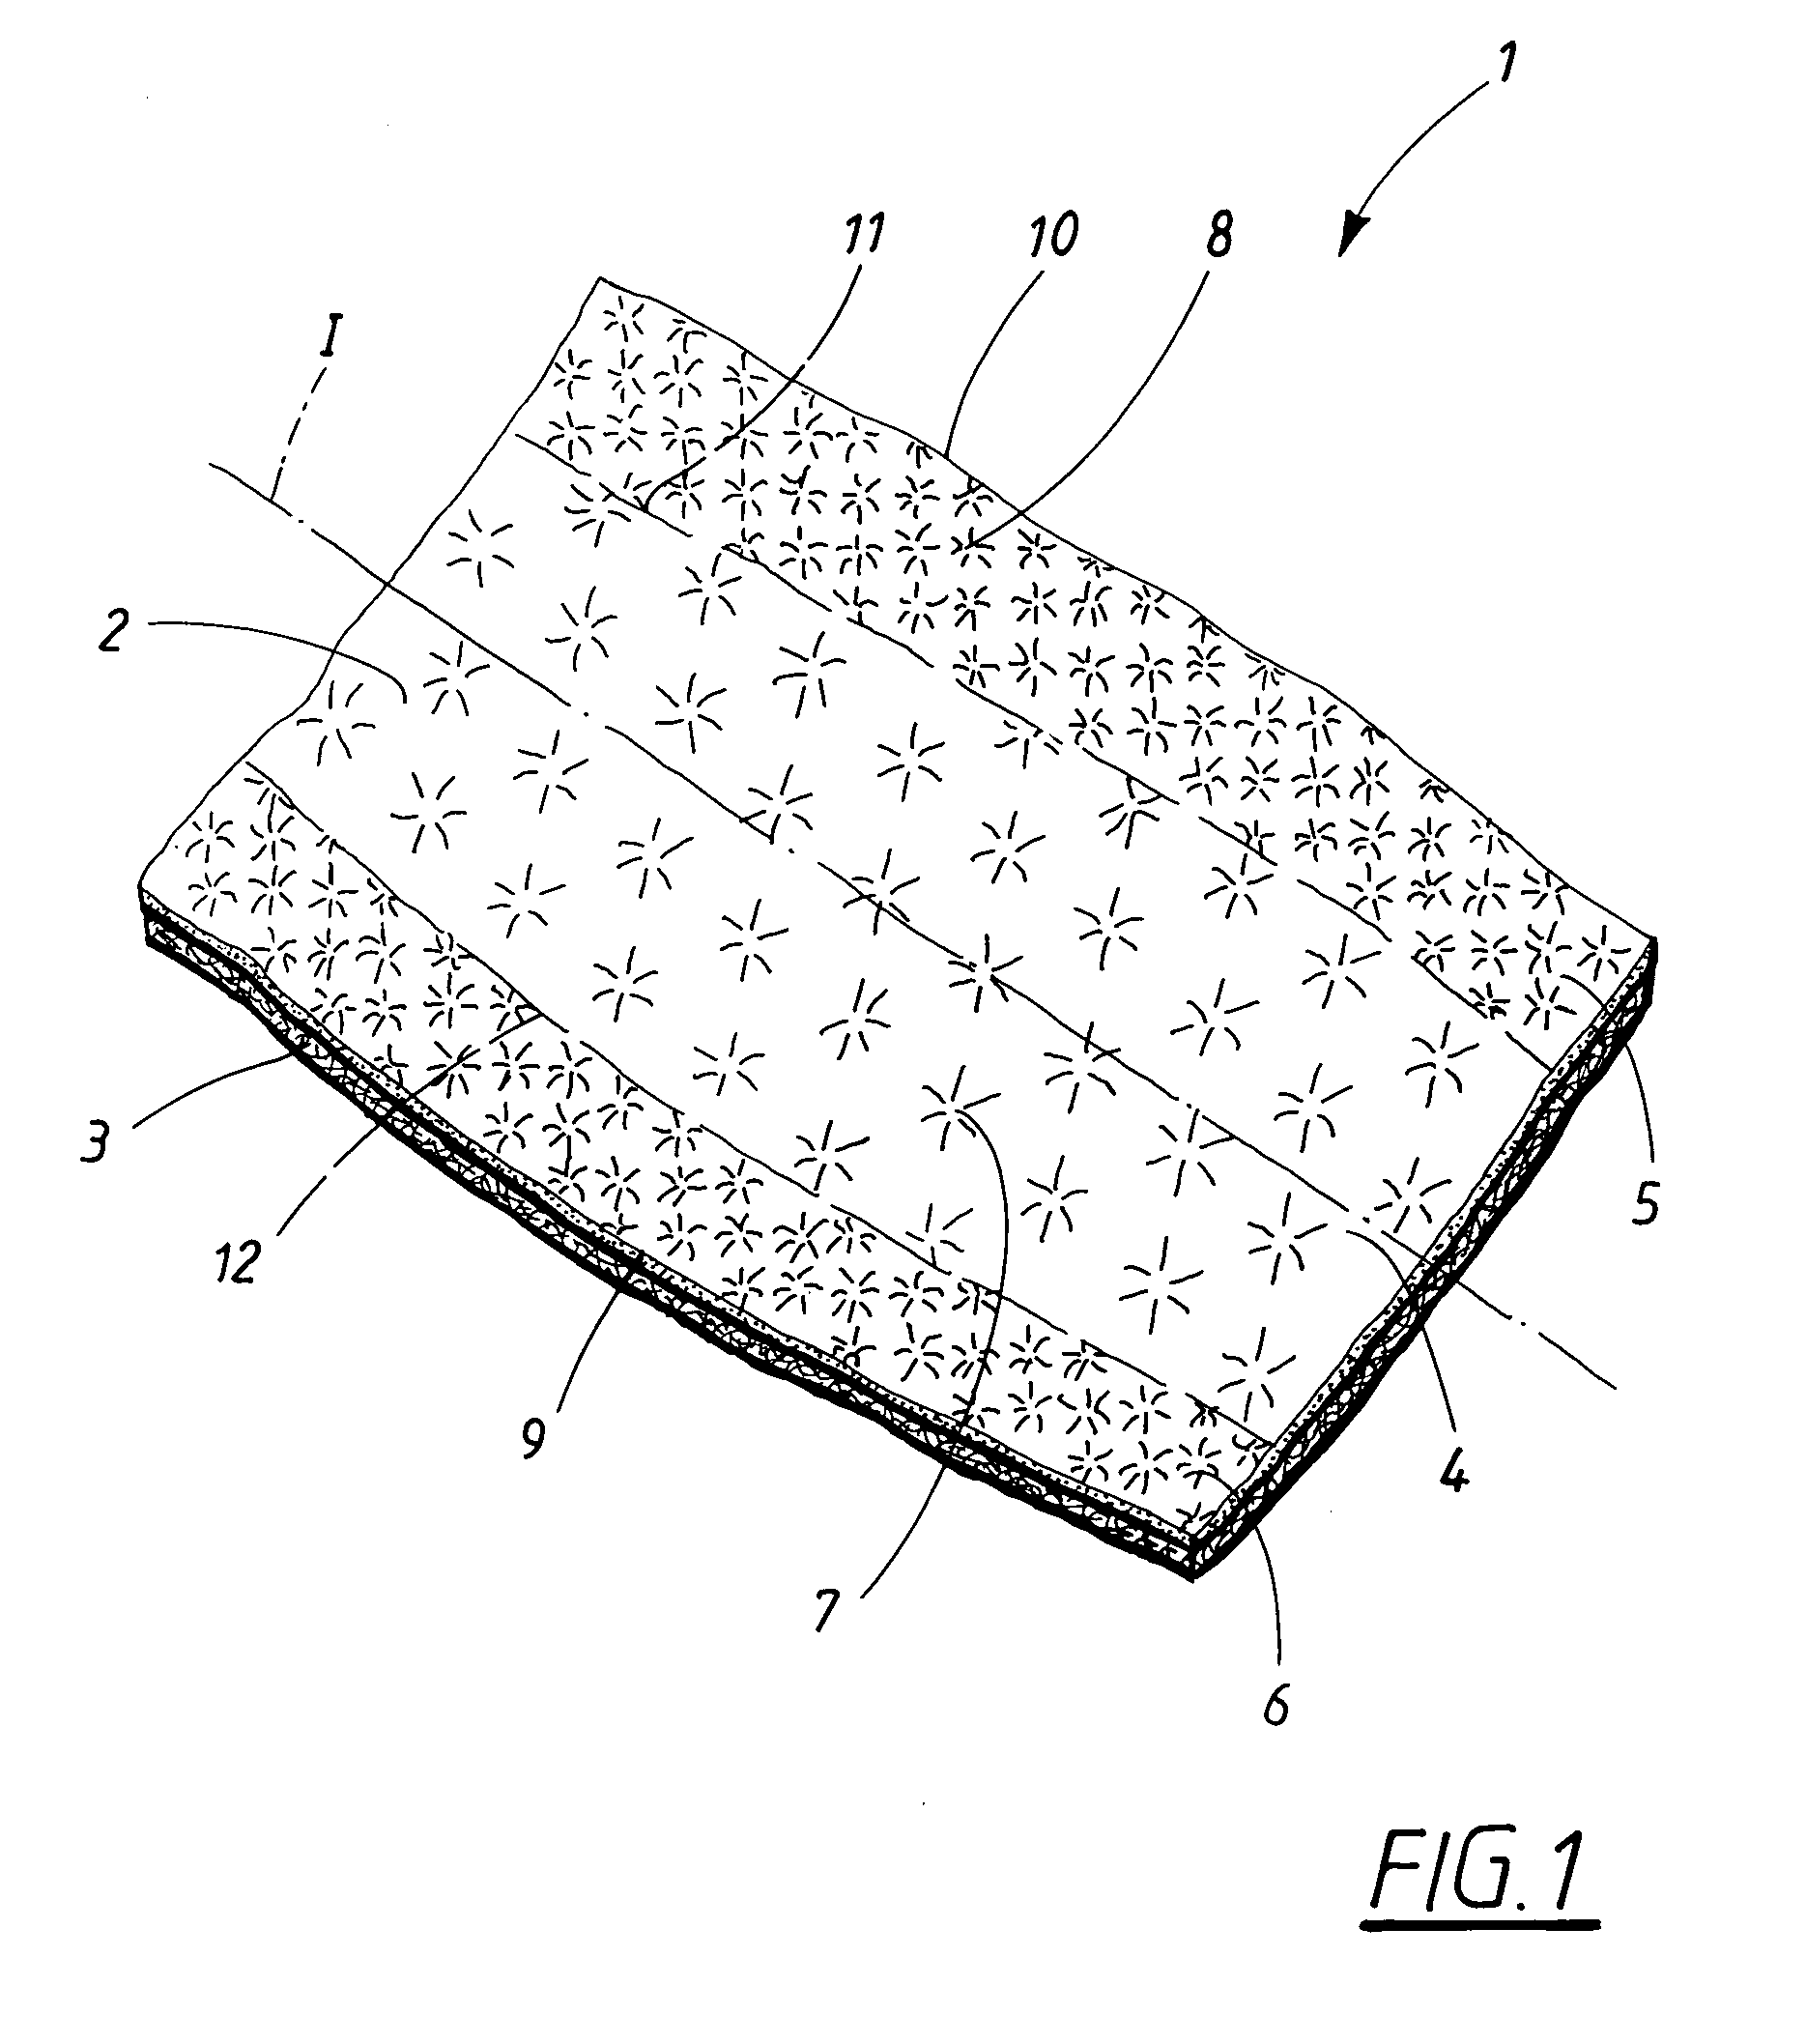 Material laminate for use as a covering sheet in an absorbent article